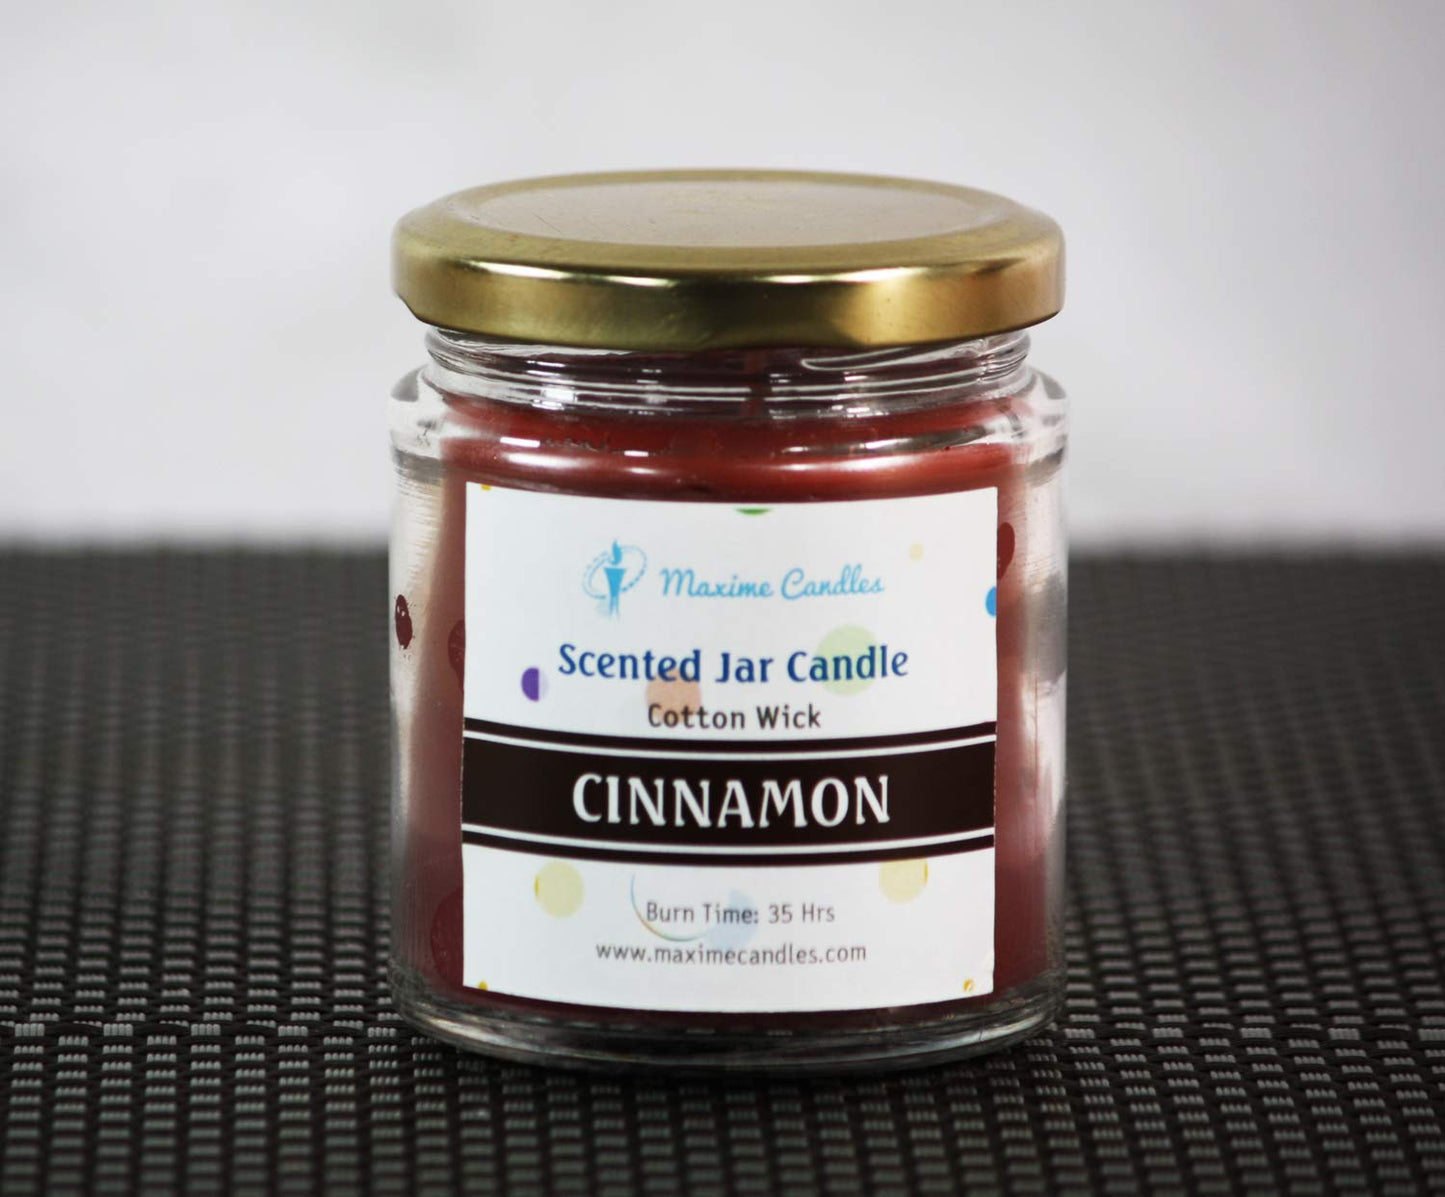 Cinnamon Fragranced Glass Jar Scented Candle